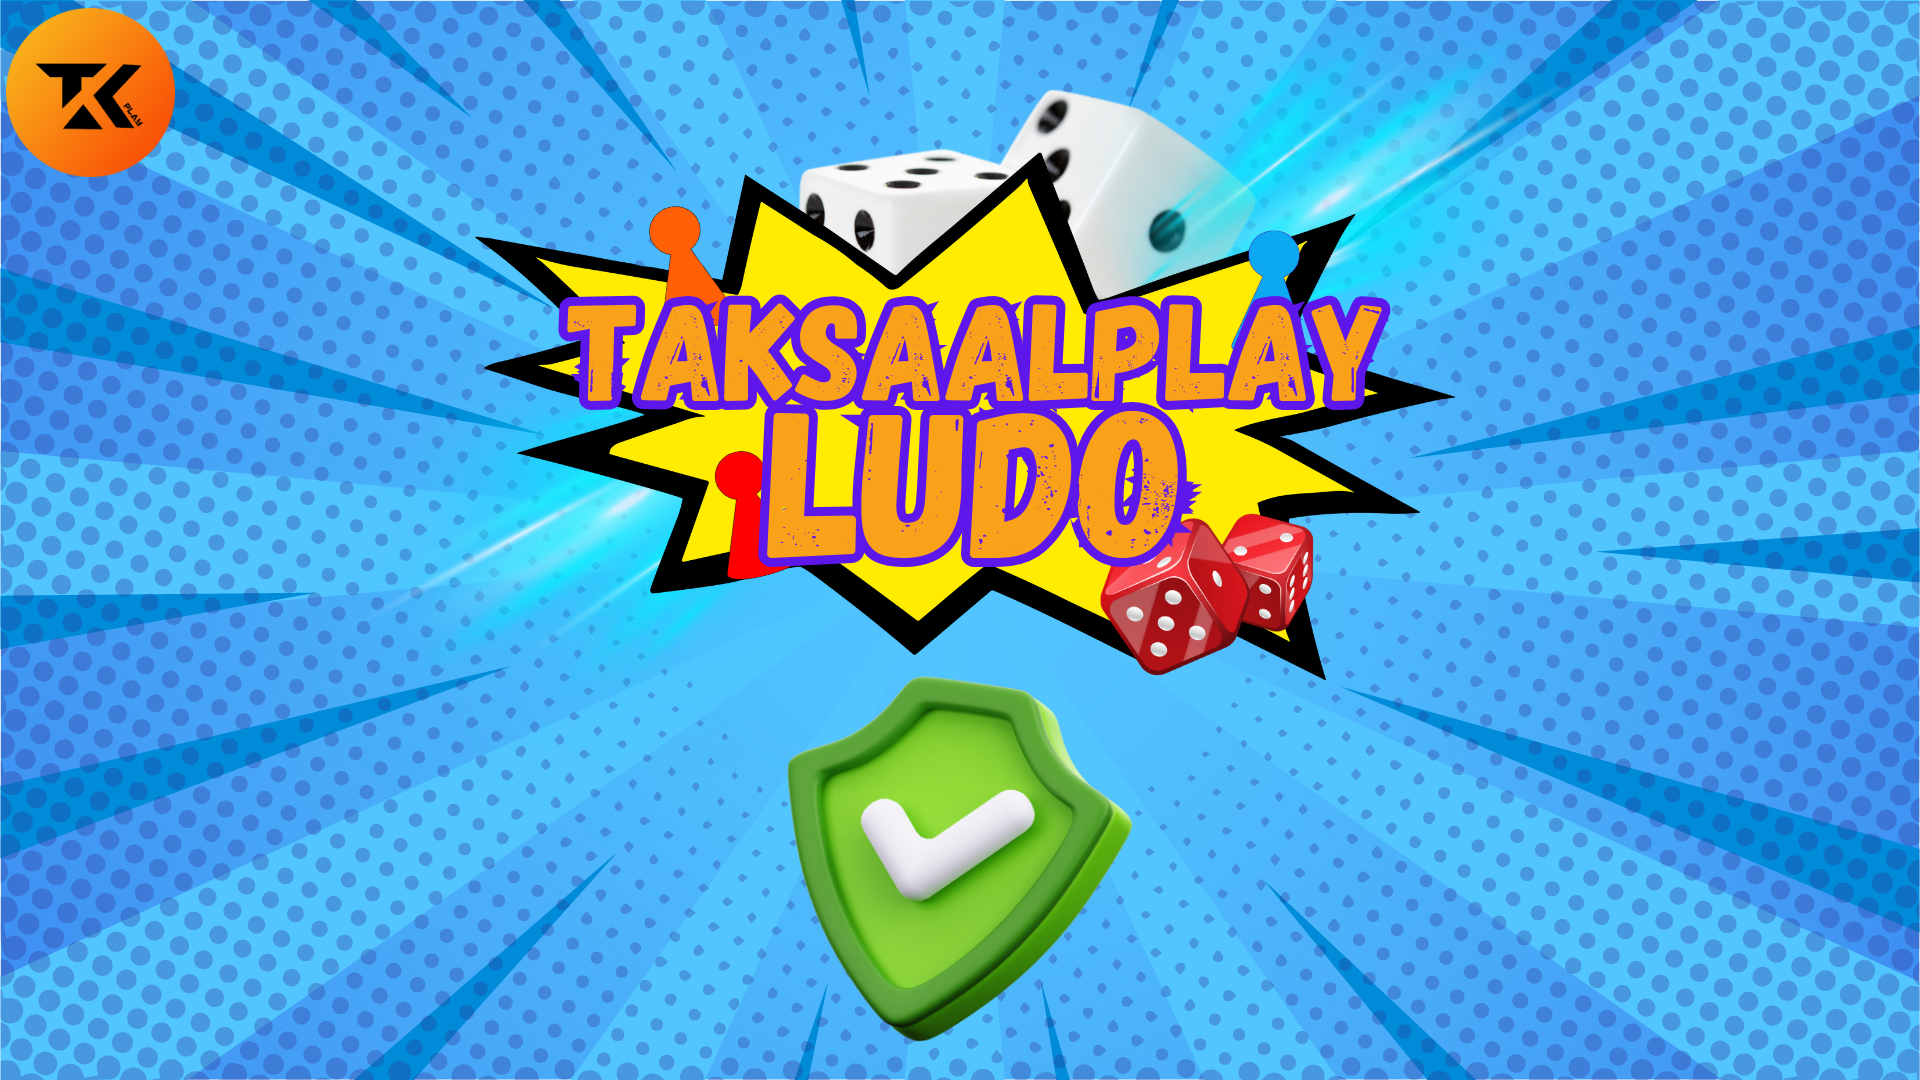  Ensure Privacy Protection for Your Ludo game